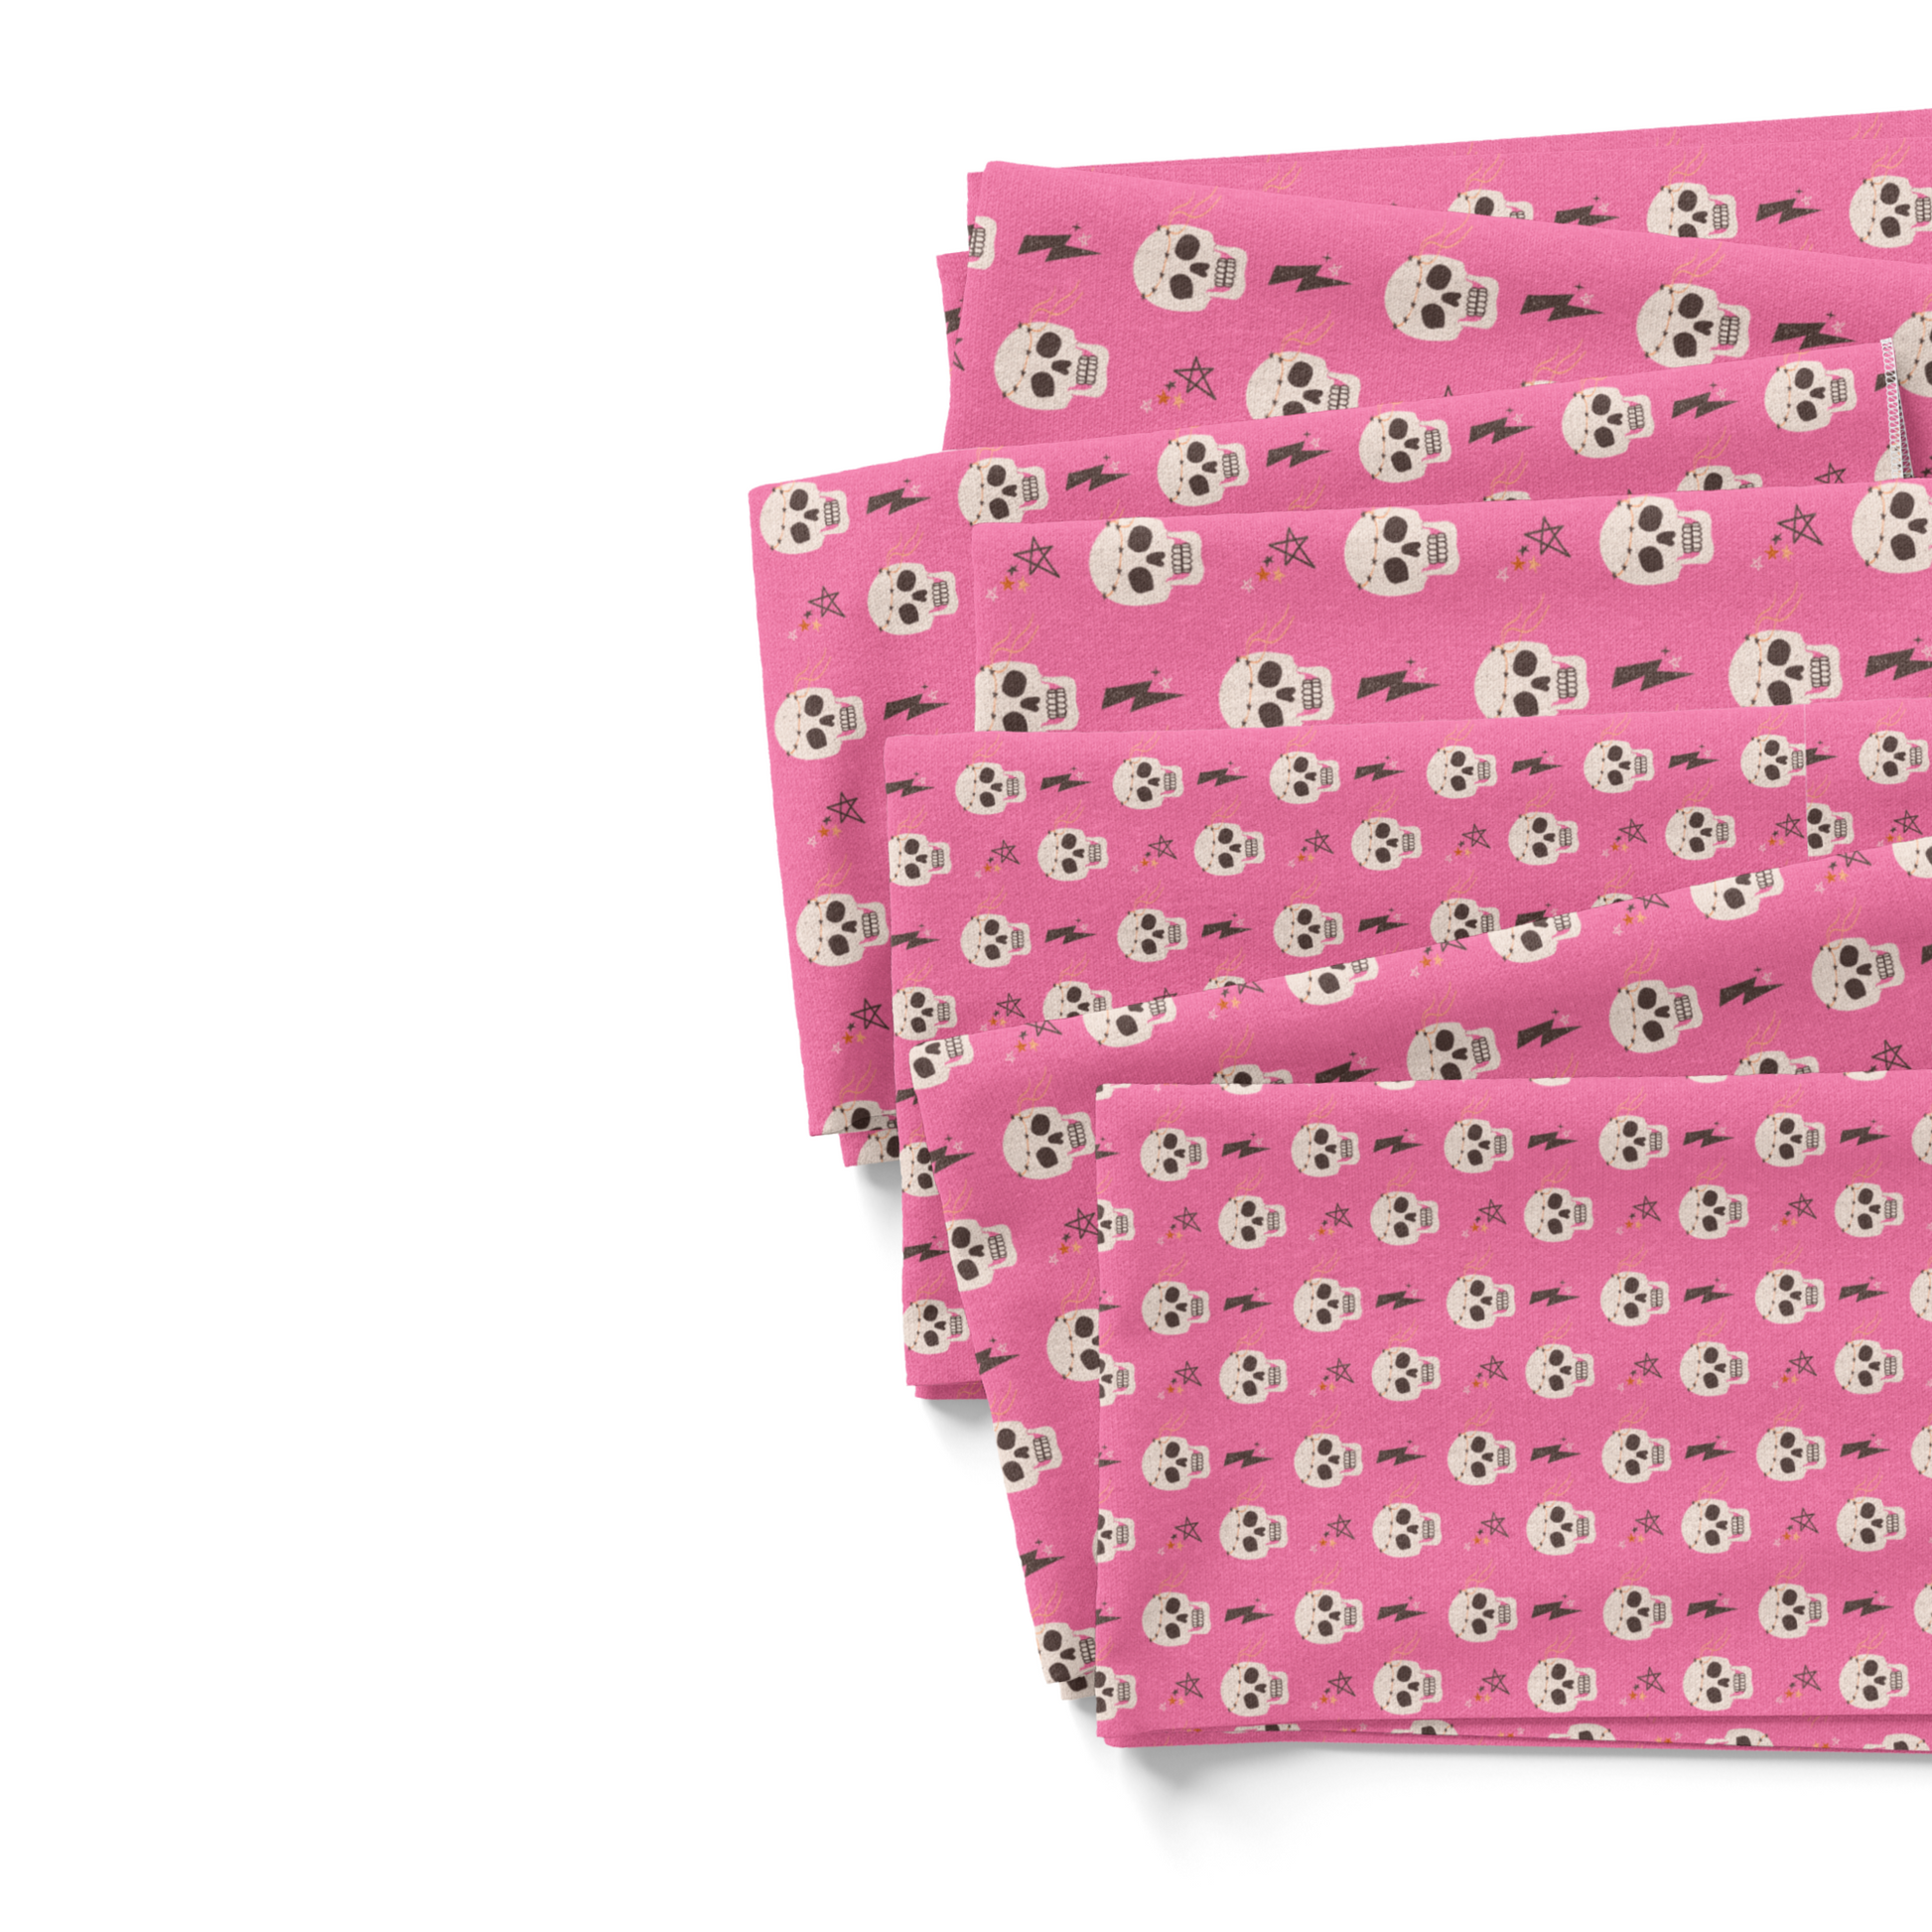 Hot Pink Fabric by the yard swatches with skulls, lightning bolts, and stars.